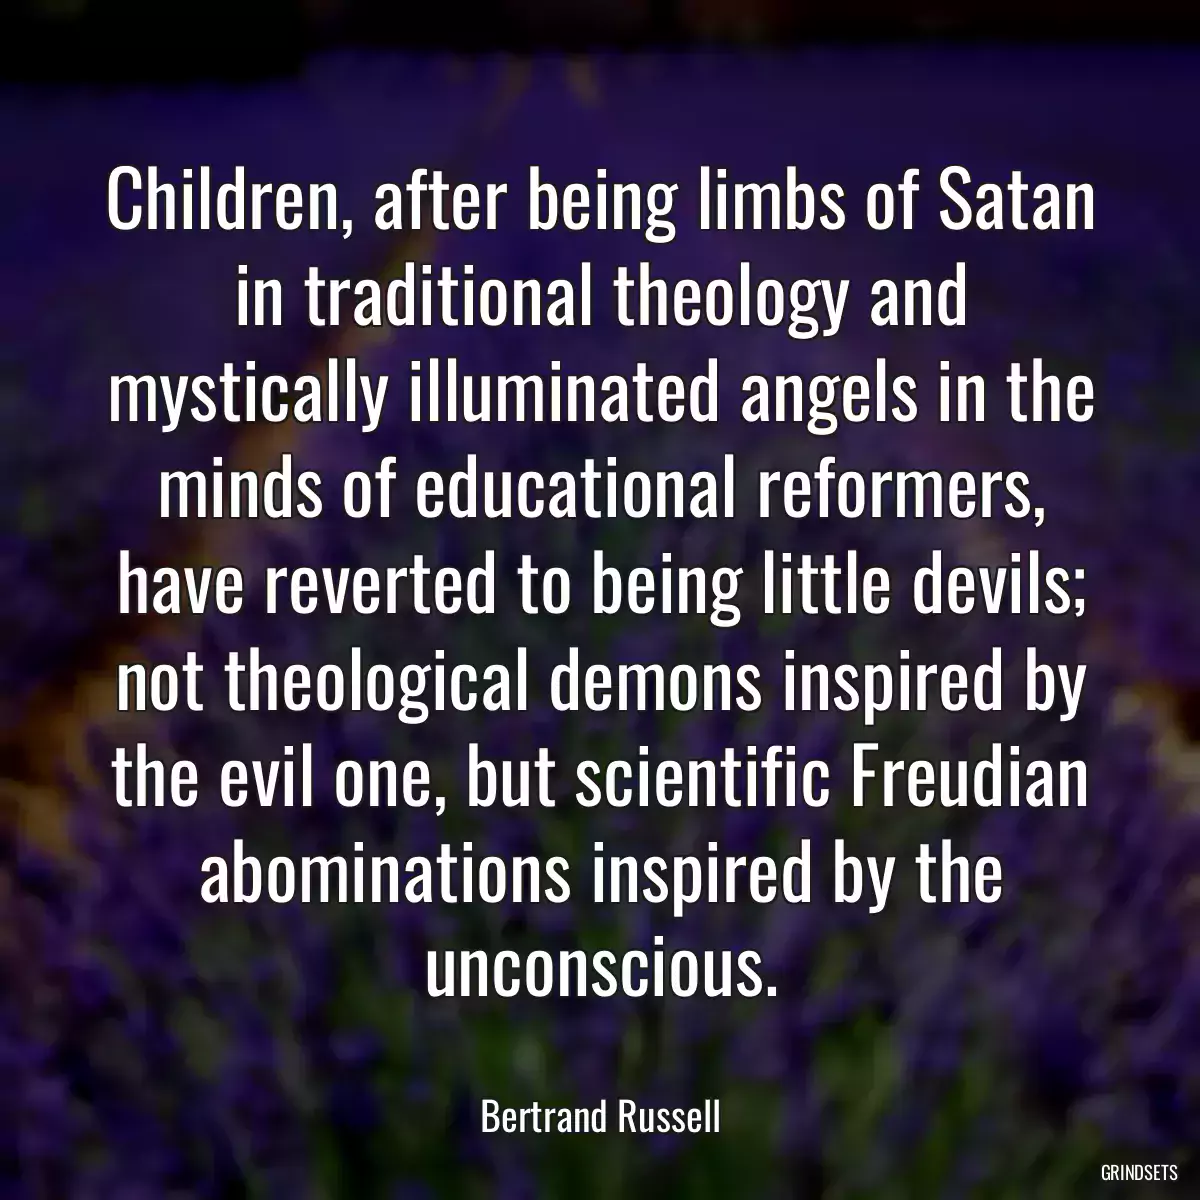 Children, after being limbs of Satan in traditional theology and mystically illuminated angels in the minds of educational reformers, have reverted to being little devils; not theological demons inspired by the evil one, but scientific Freudian abominations inspired by the unconscious.